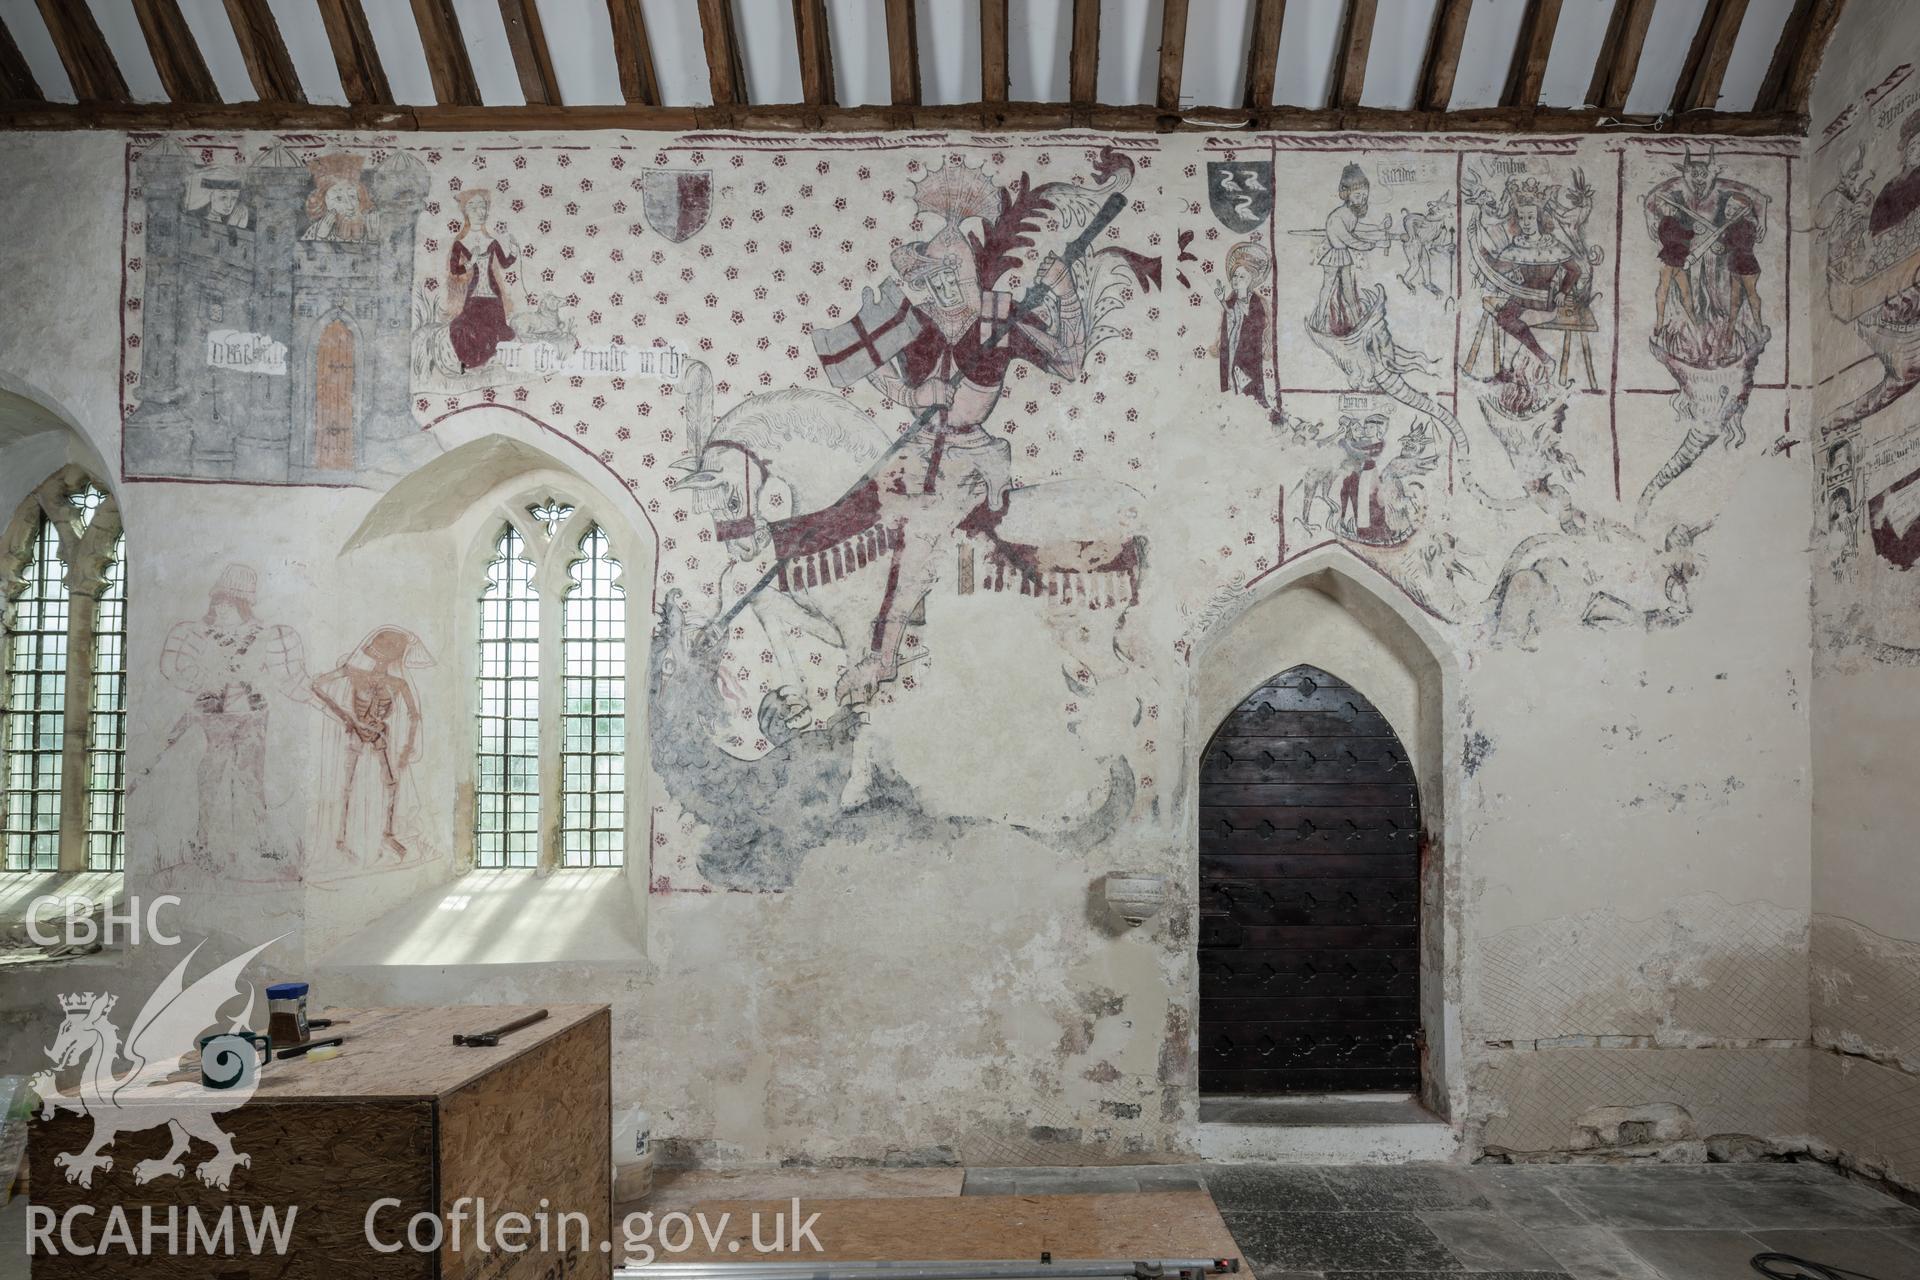 Wallpaintings on south wall